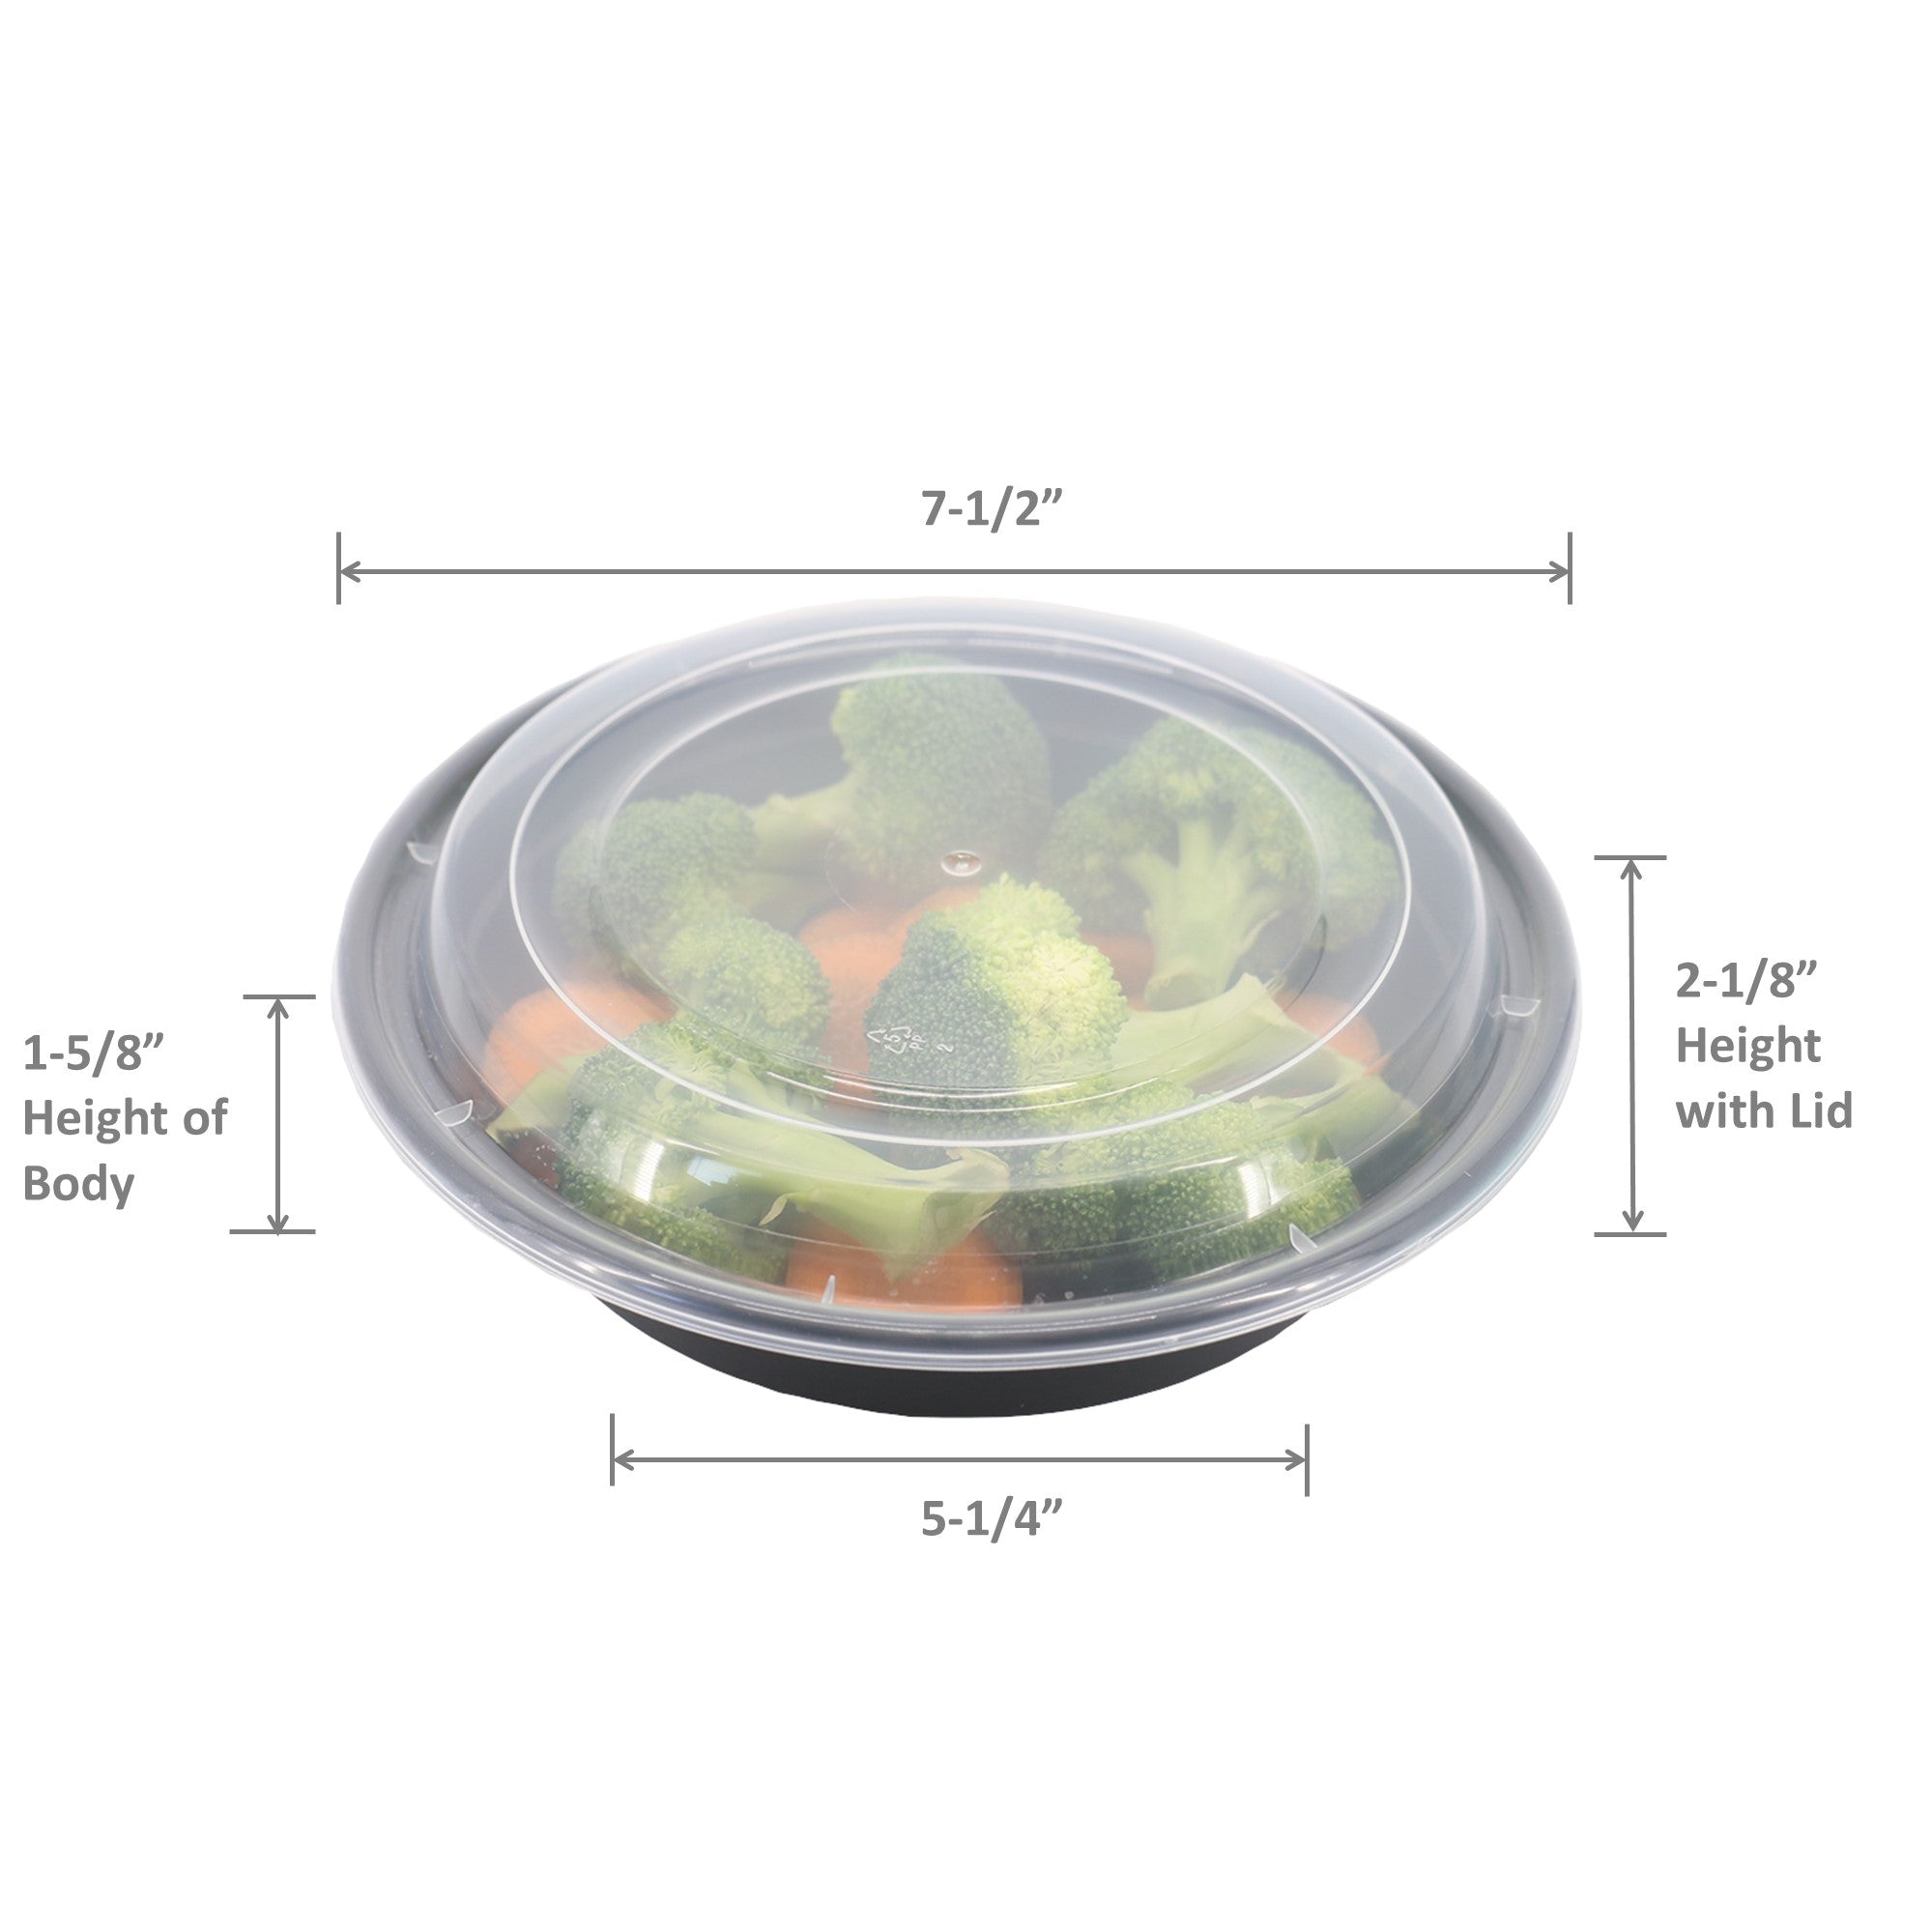 Leyso TO-JR32 32oz Round Food Container with Clear Lid - Microwave, Dishwasher Safe